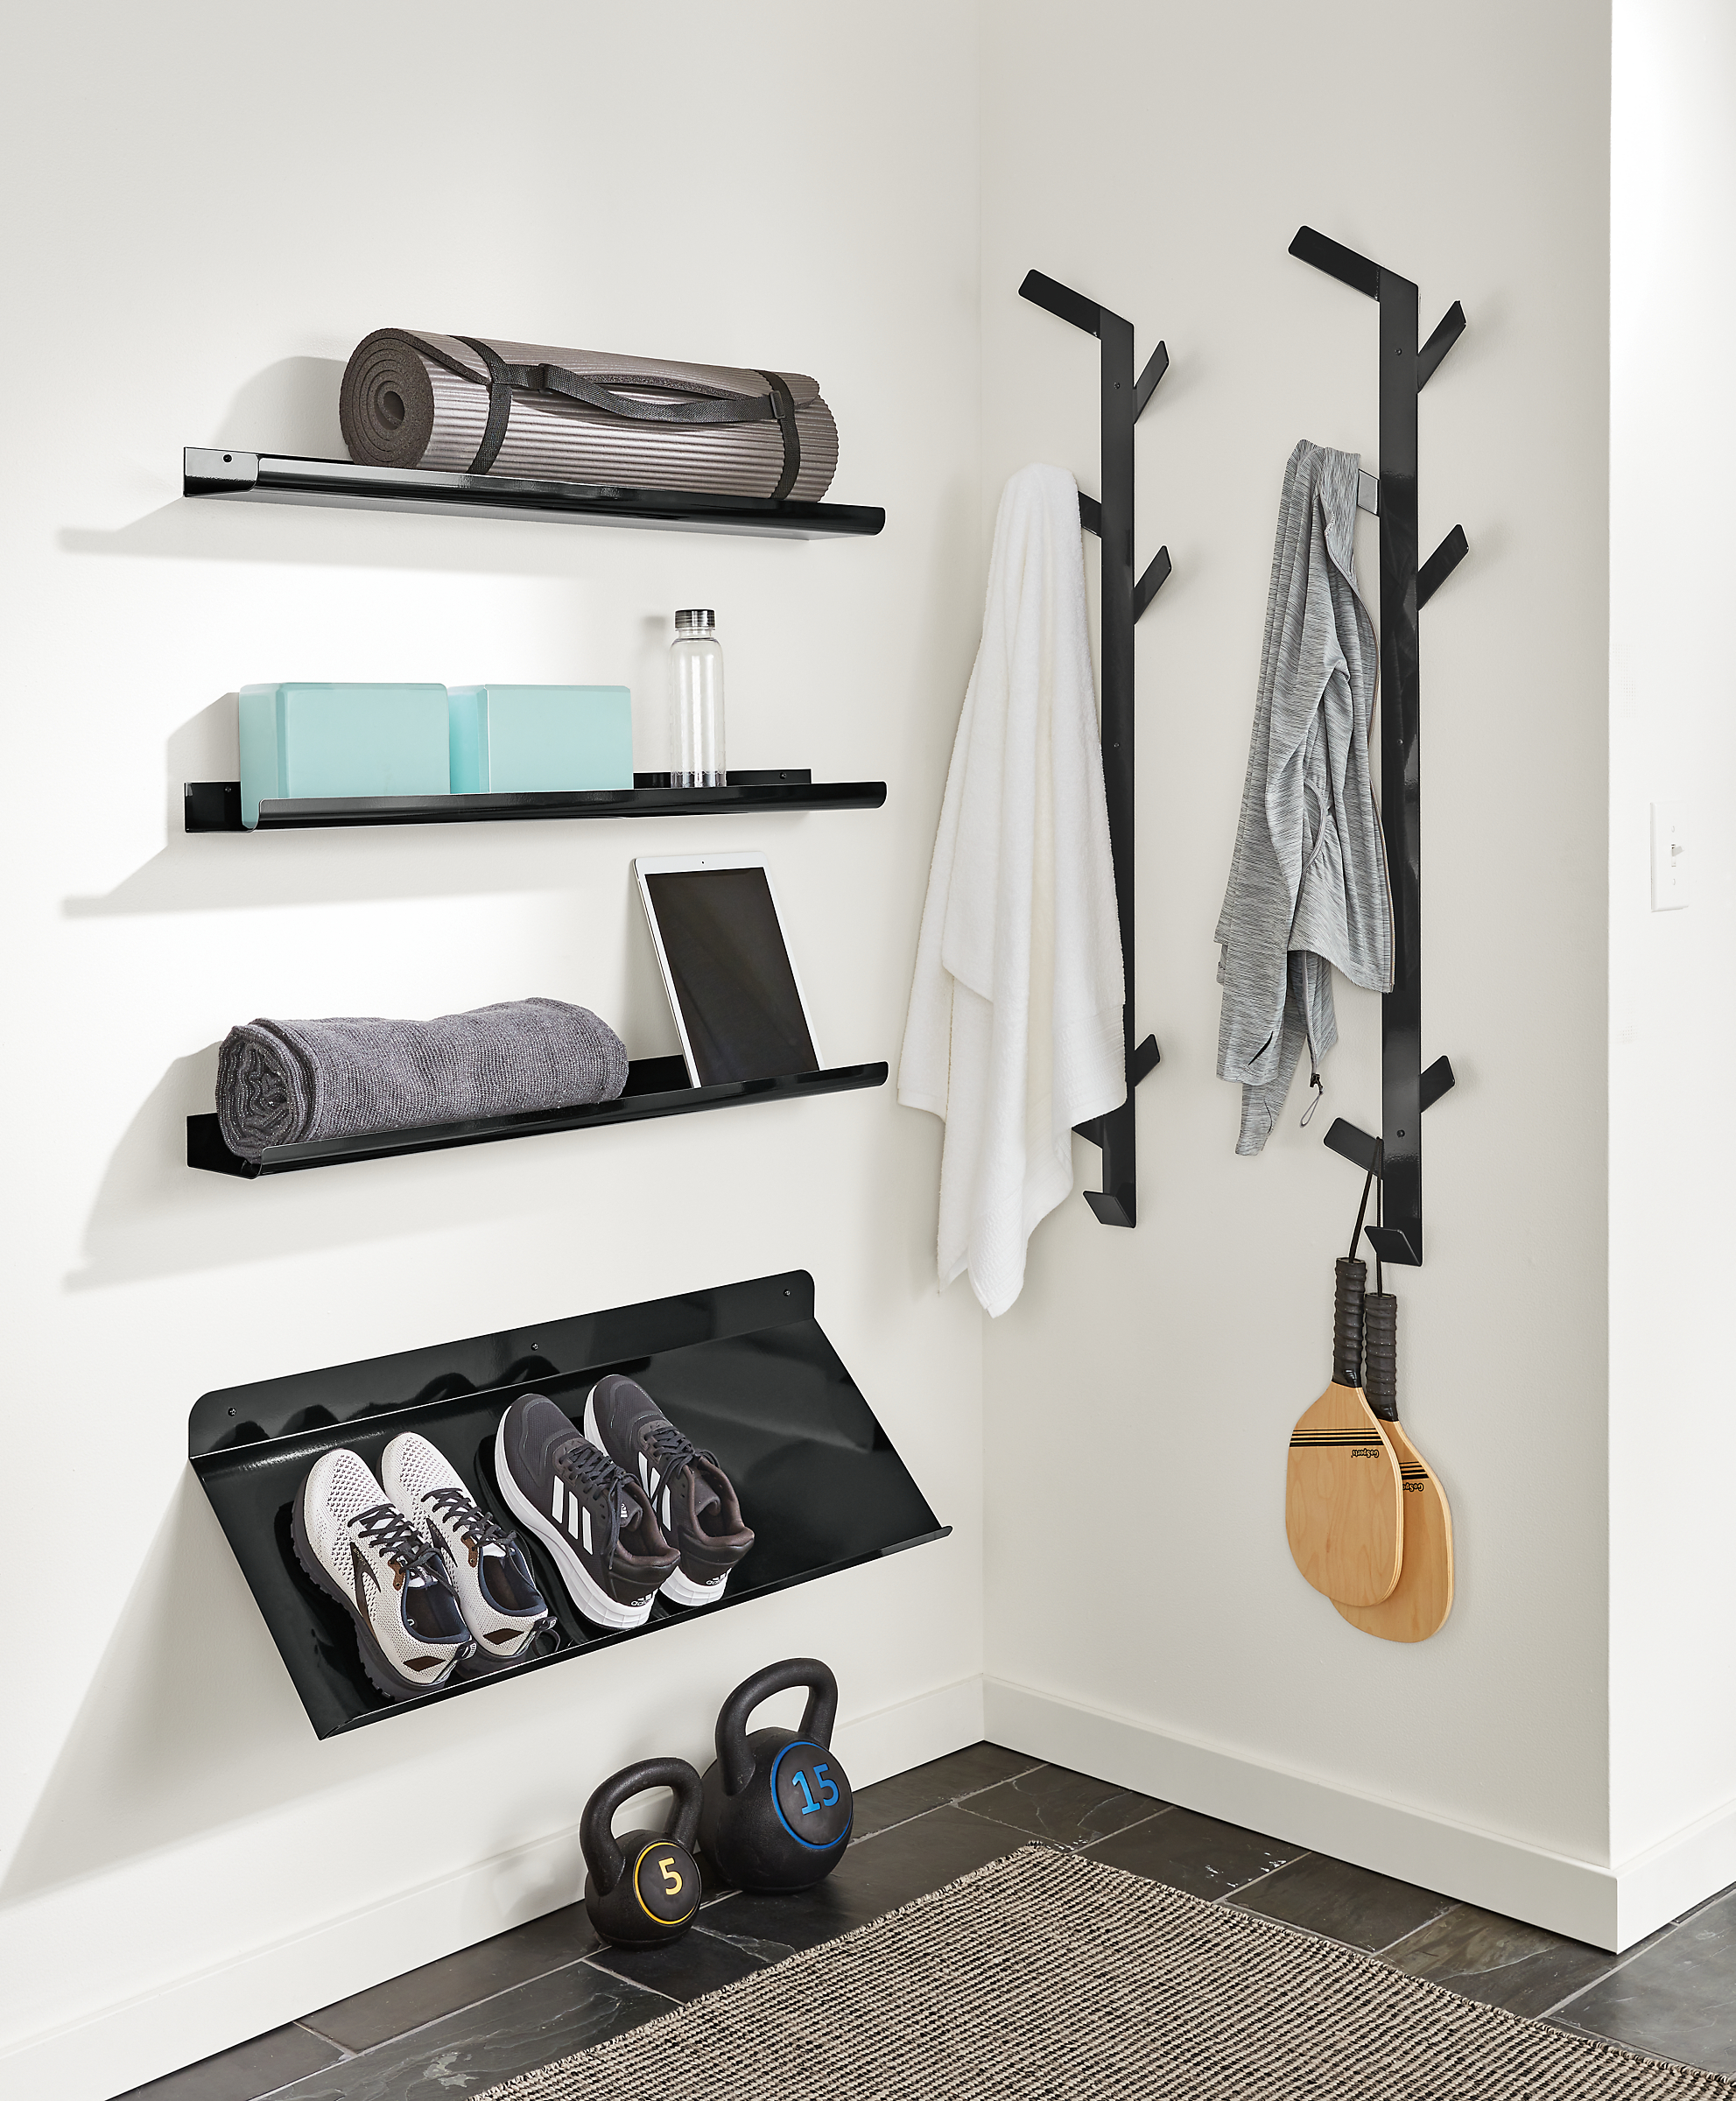 detail of trace picture ledges, esker shoe rack and crew vertical coat racks all mounted on wall in home gym